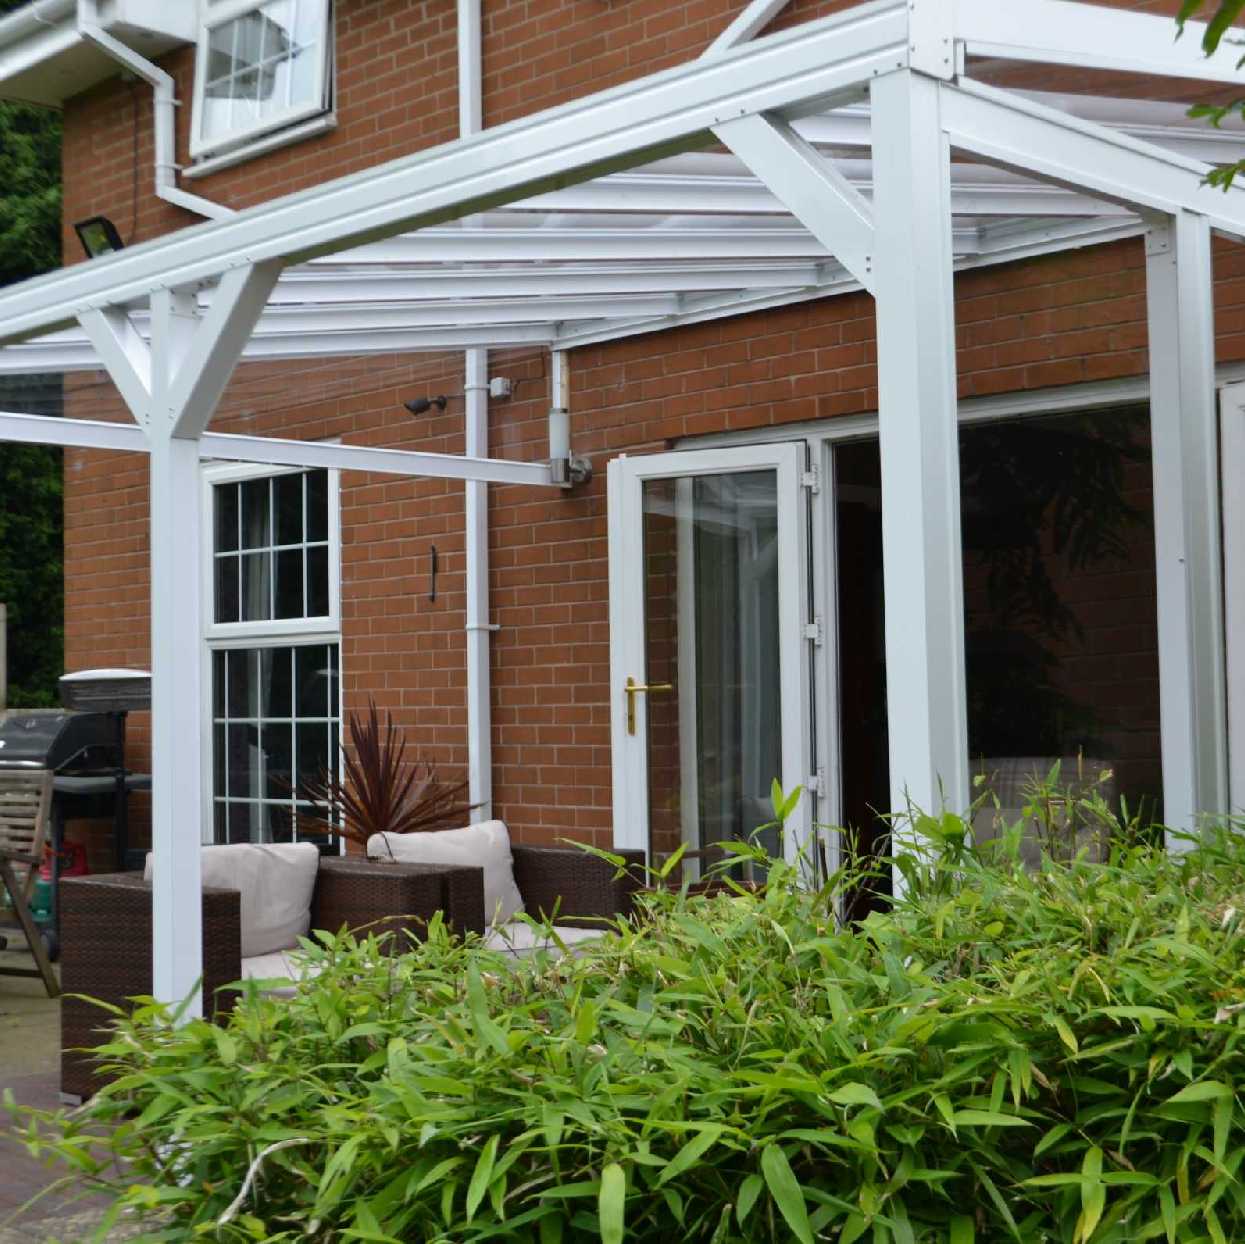 Omega Smart Lean-To Canopy, White UNGLAZED for 6mm Glazing - 8.4m (W) x 2.0m (P), (4) Supporting Posts from Omega Build